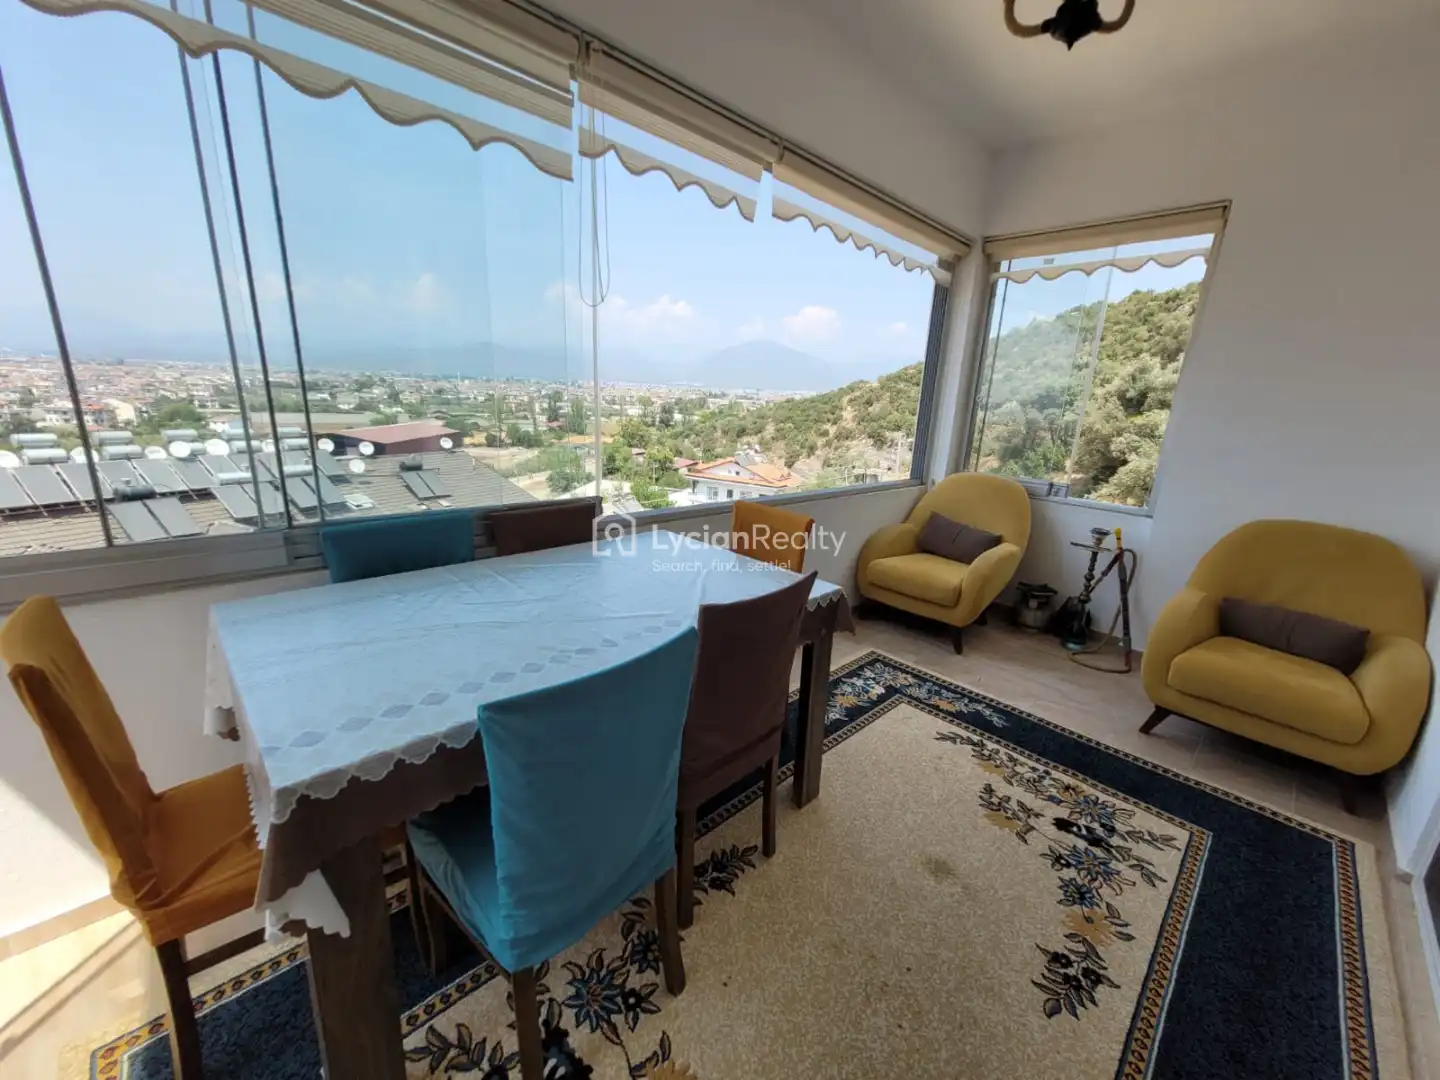 FLAT JUNO | Apartment in Fethiye with Excellent Views